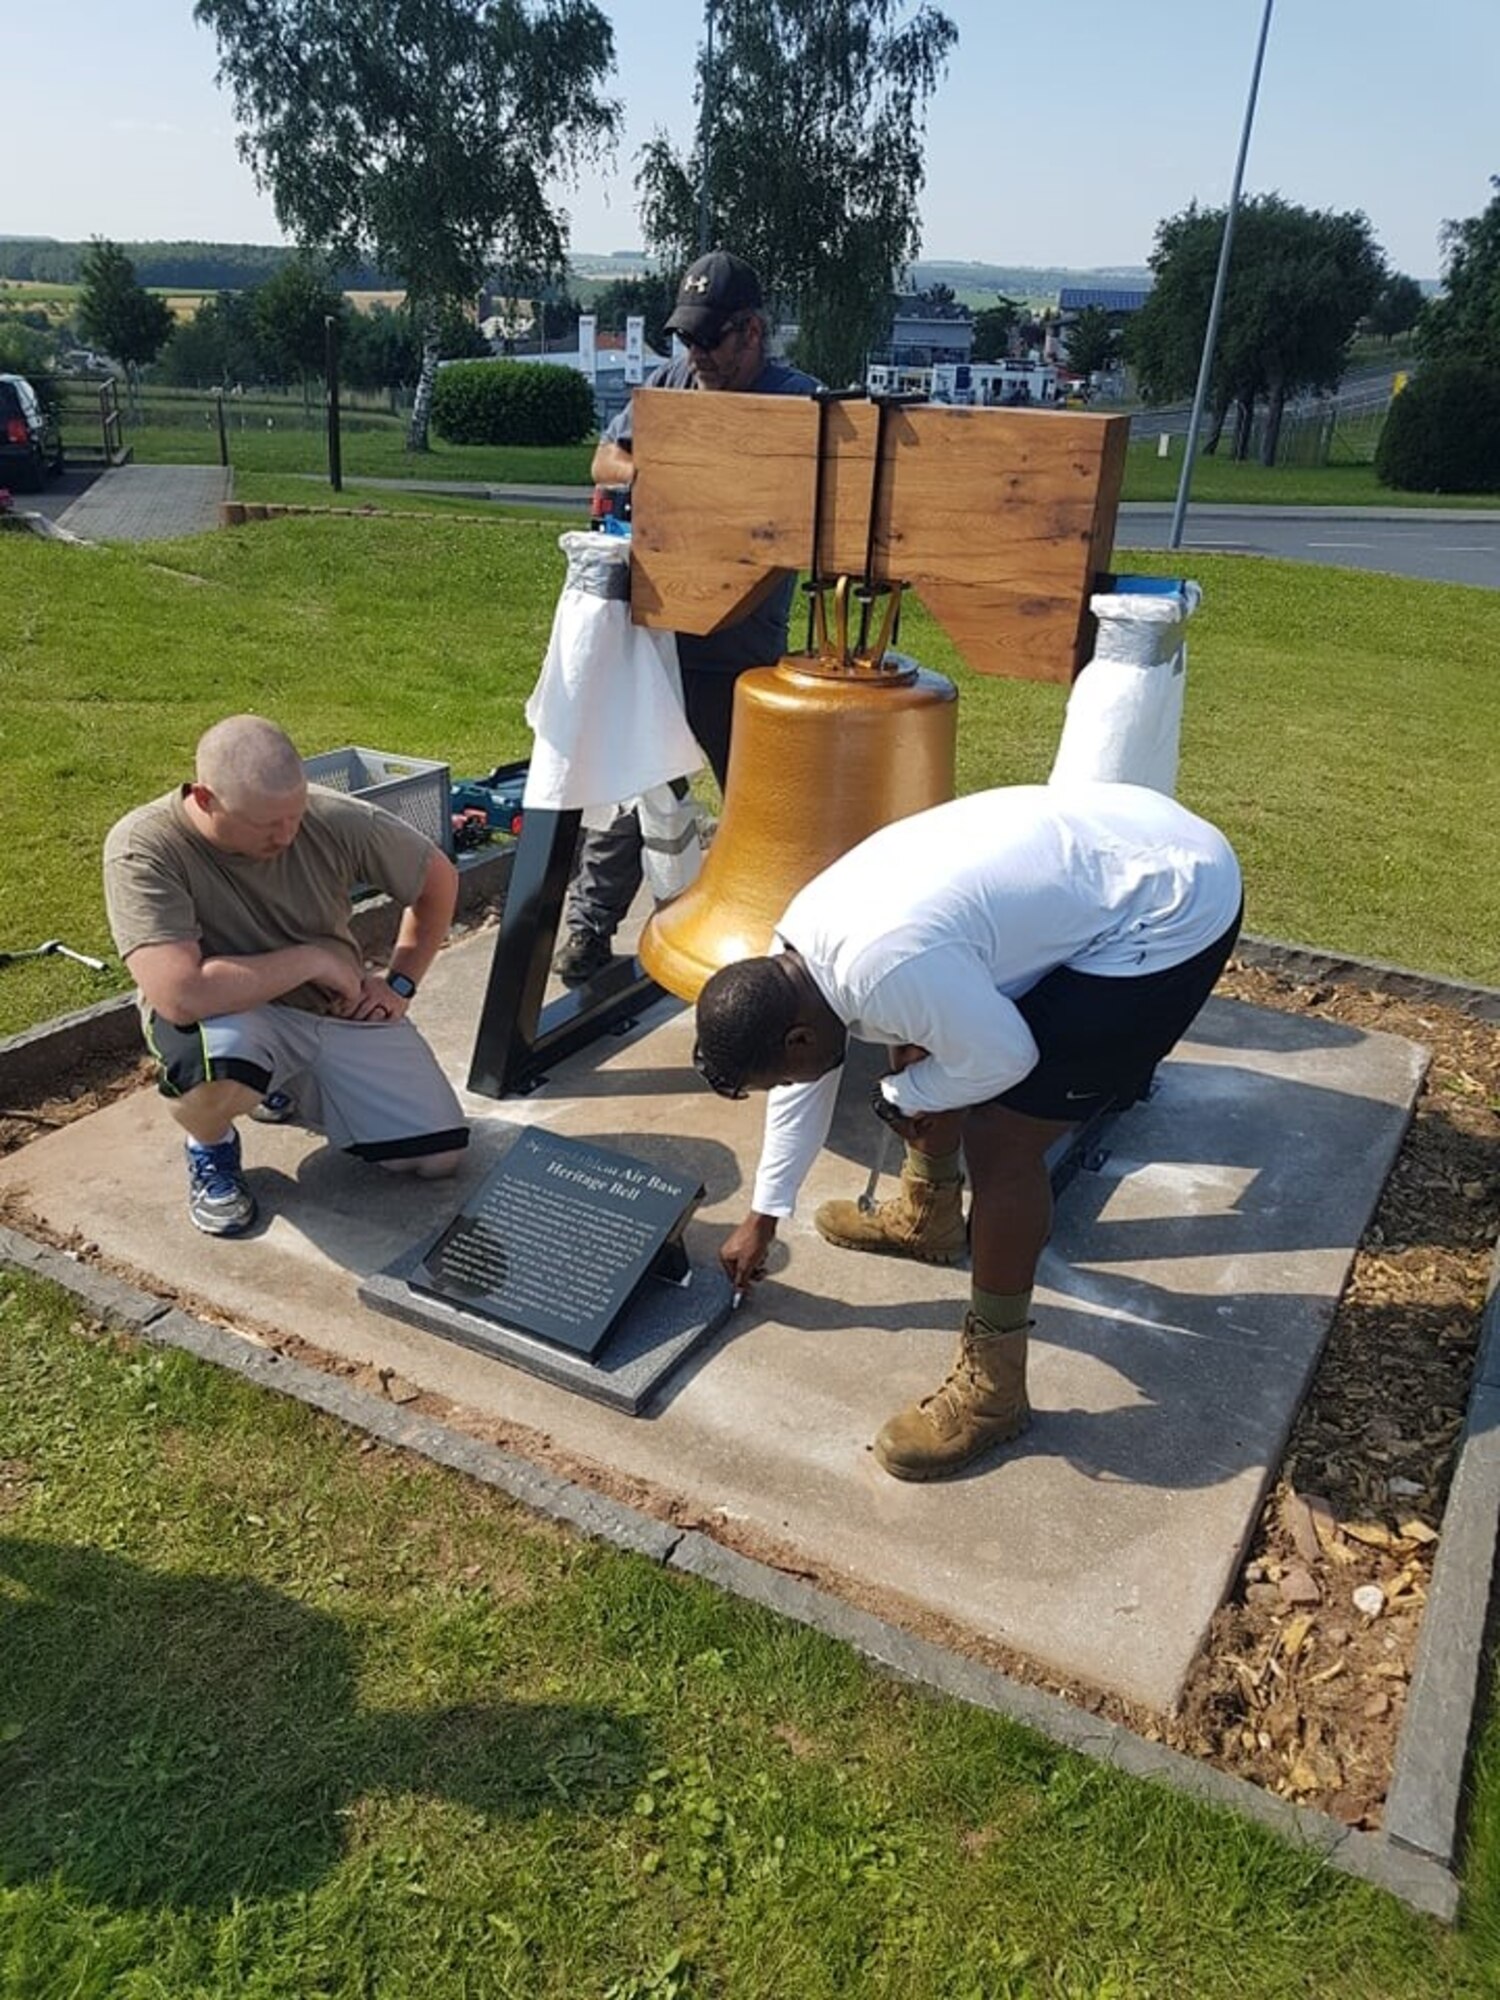 Volunteers, composed of retired and 52nd Maintenance Squadron Airmen, help refurbish the Spangdahlem Heritage Bell in 2021 on Spangdahlem Air Base, Germany. The bell is a replica of the Liberty Bell, honoring America’s independence, and was presented during a ceremony in September 2021.
(Courtesy photo)